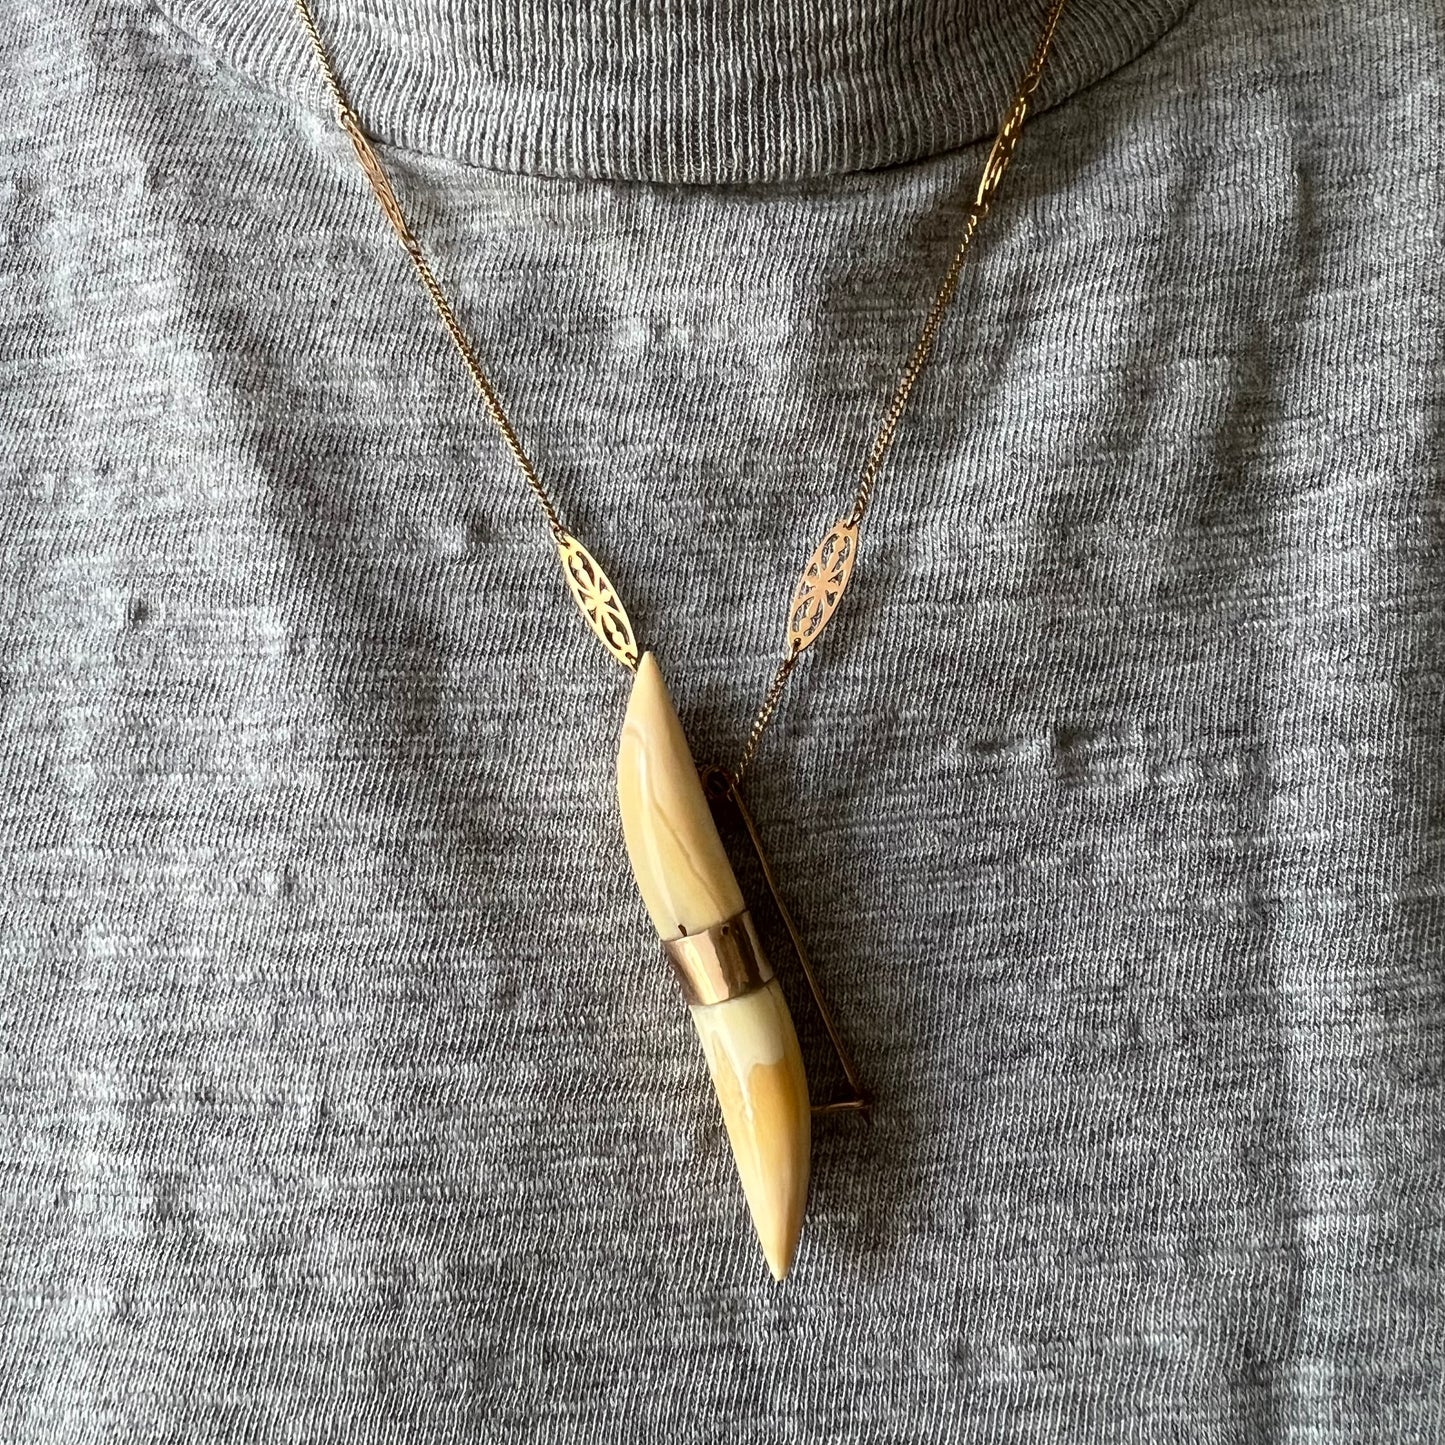 A N T I Q U E // double tusk / gold filled boar tooth or tusk / a brooch